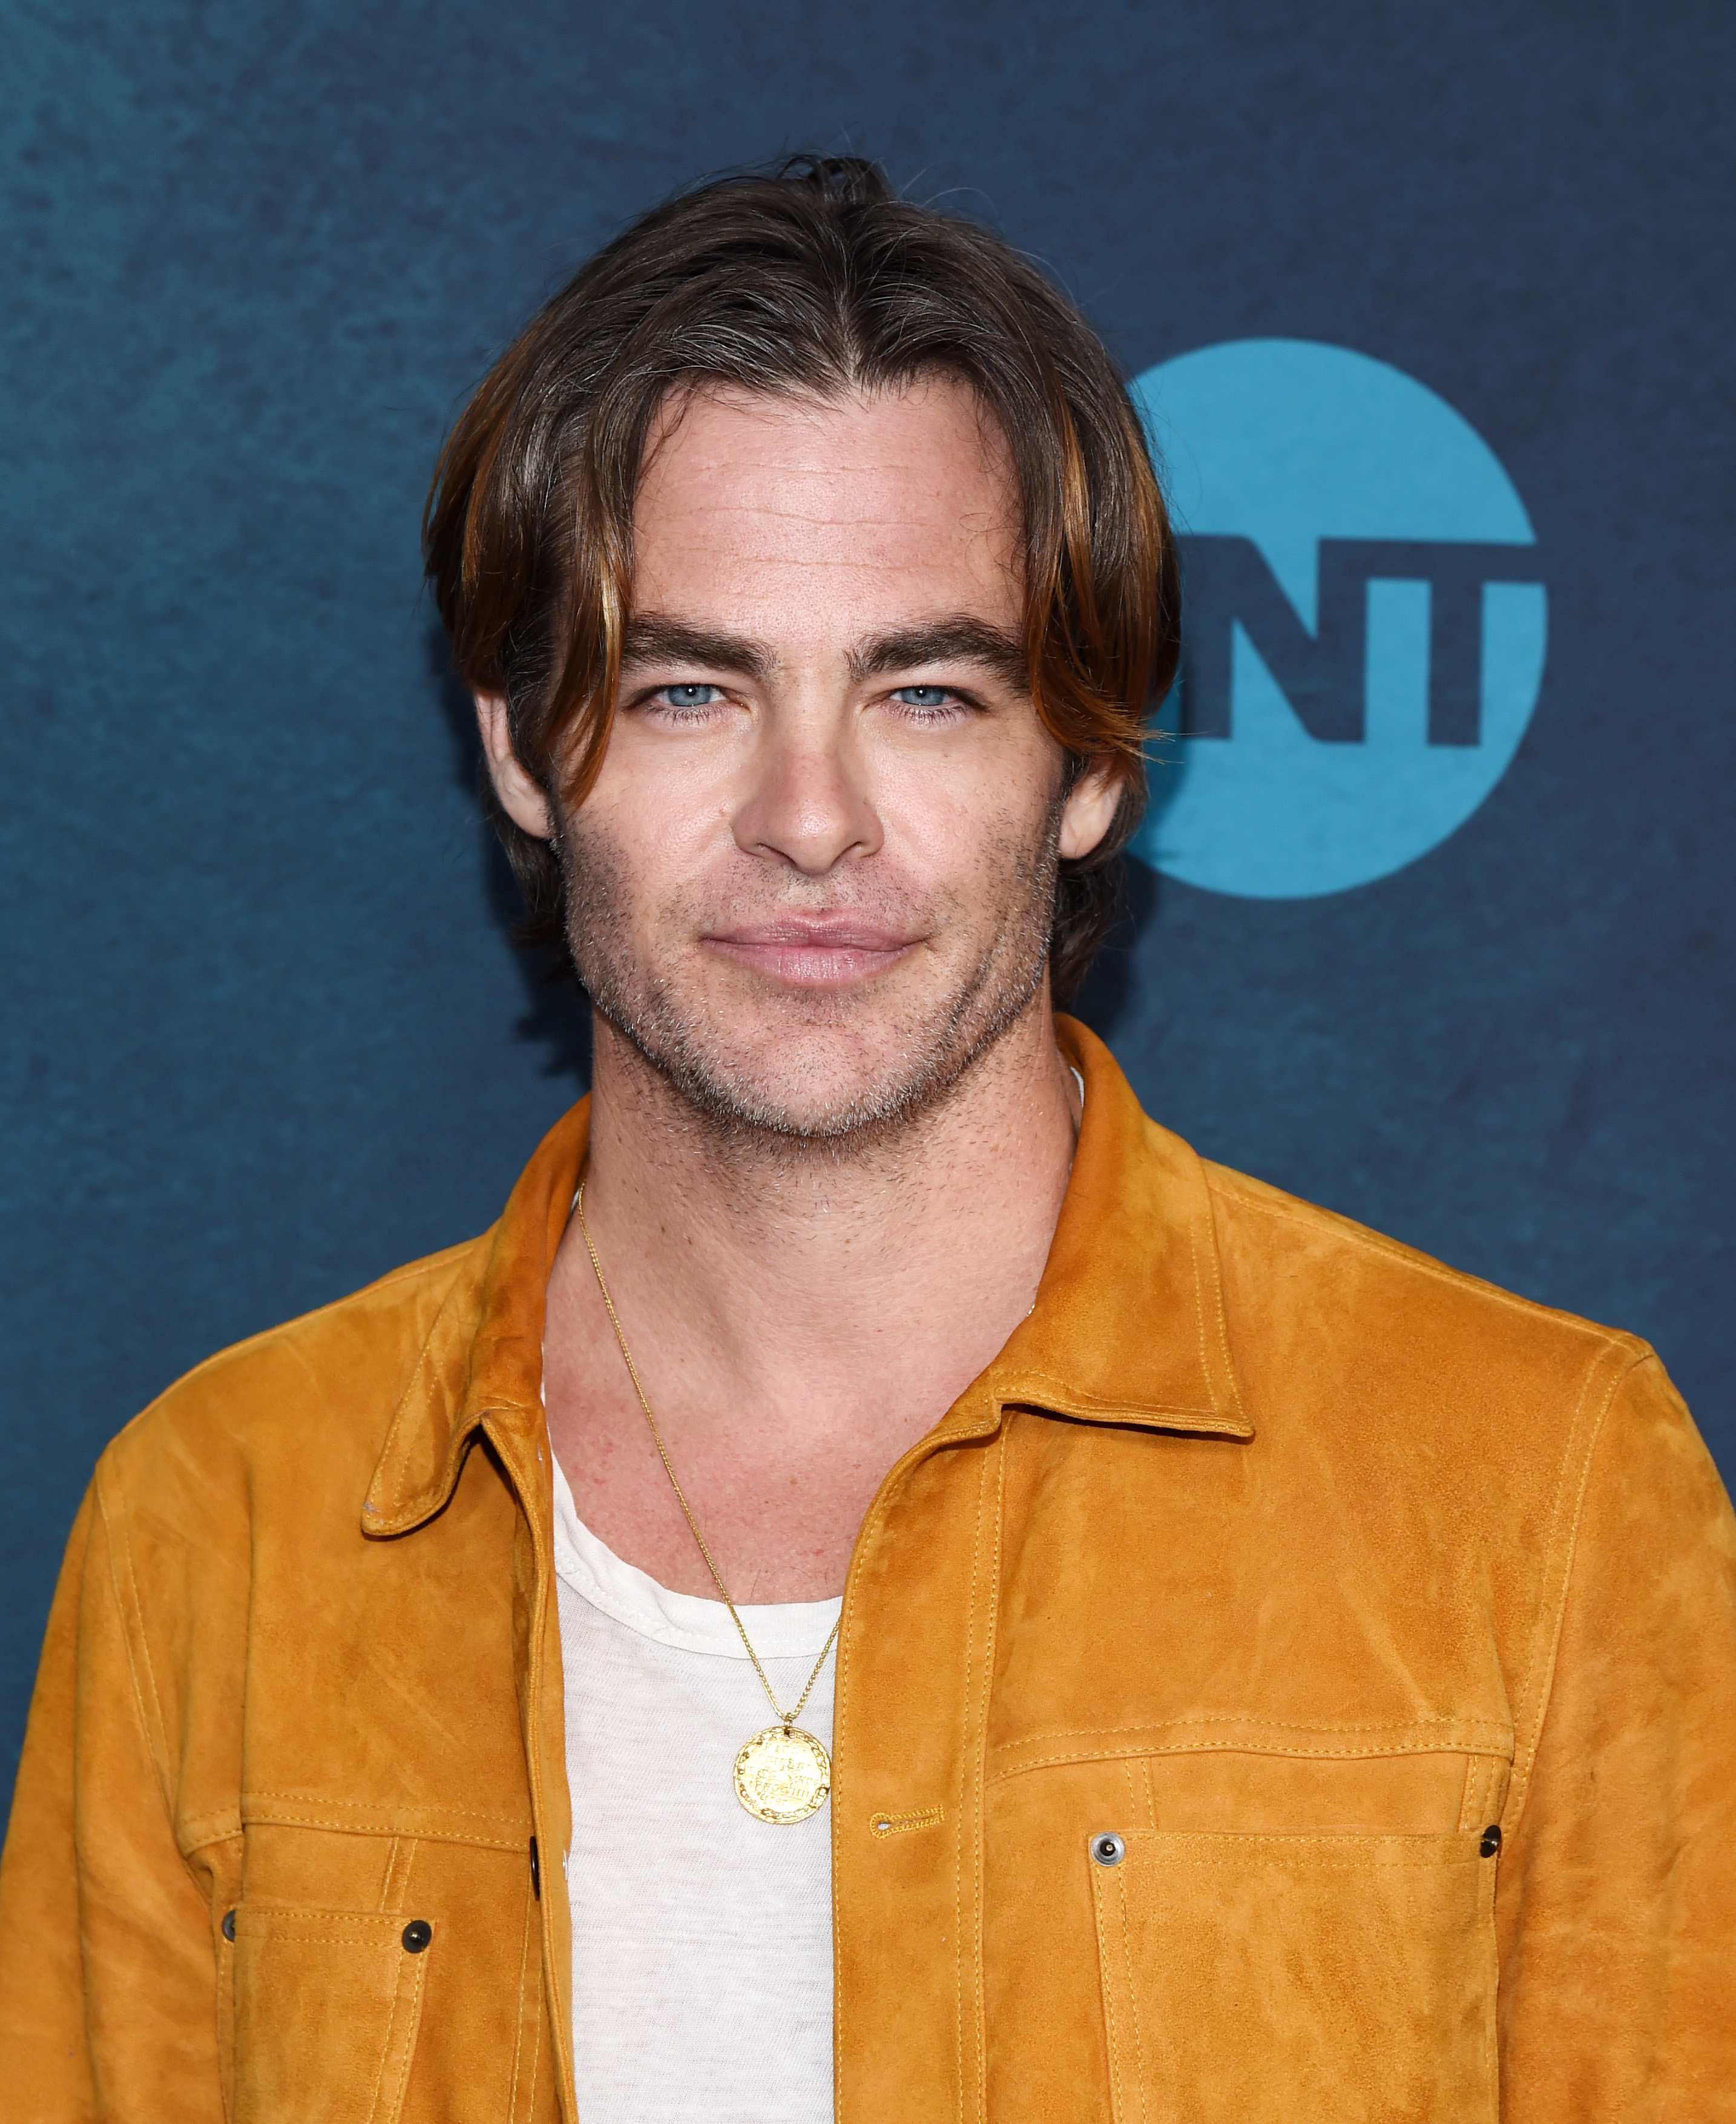 Chris Pine attends "I Am The Night" Emmy For Your Consideration Event on May 9, 2019 in Los Angeles, California. | Source: Getty Images